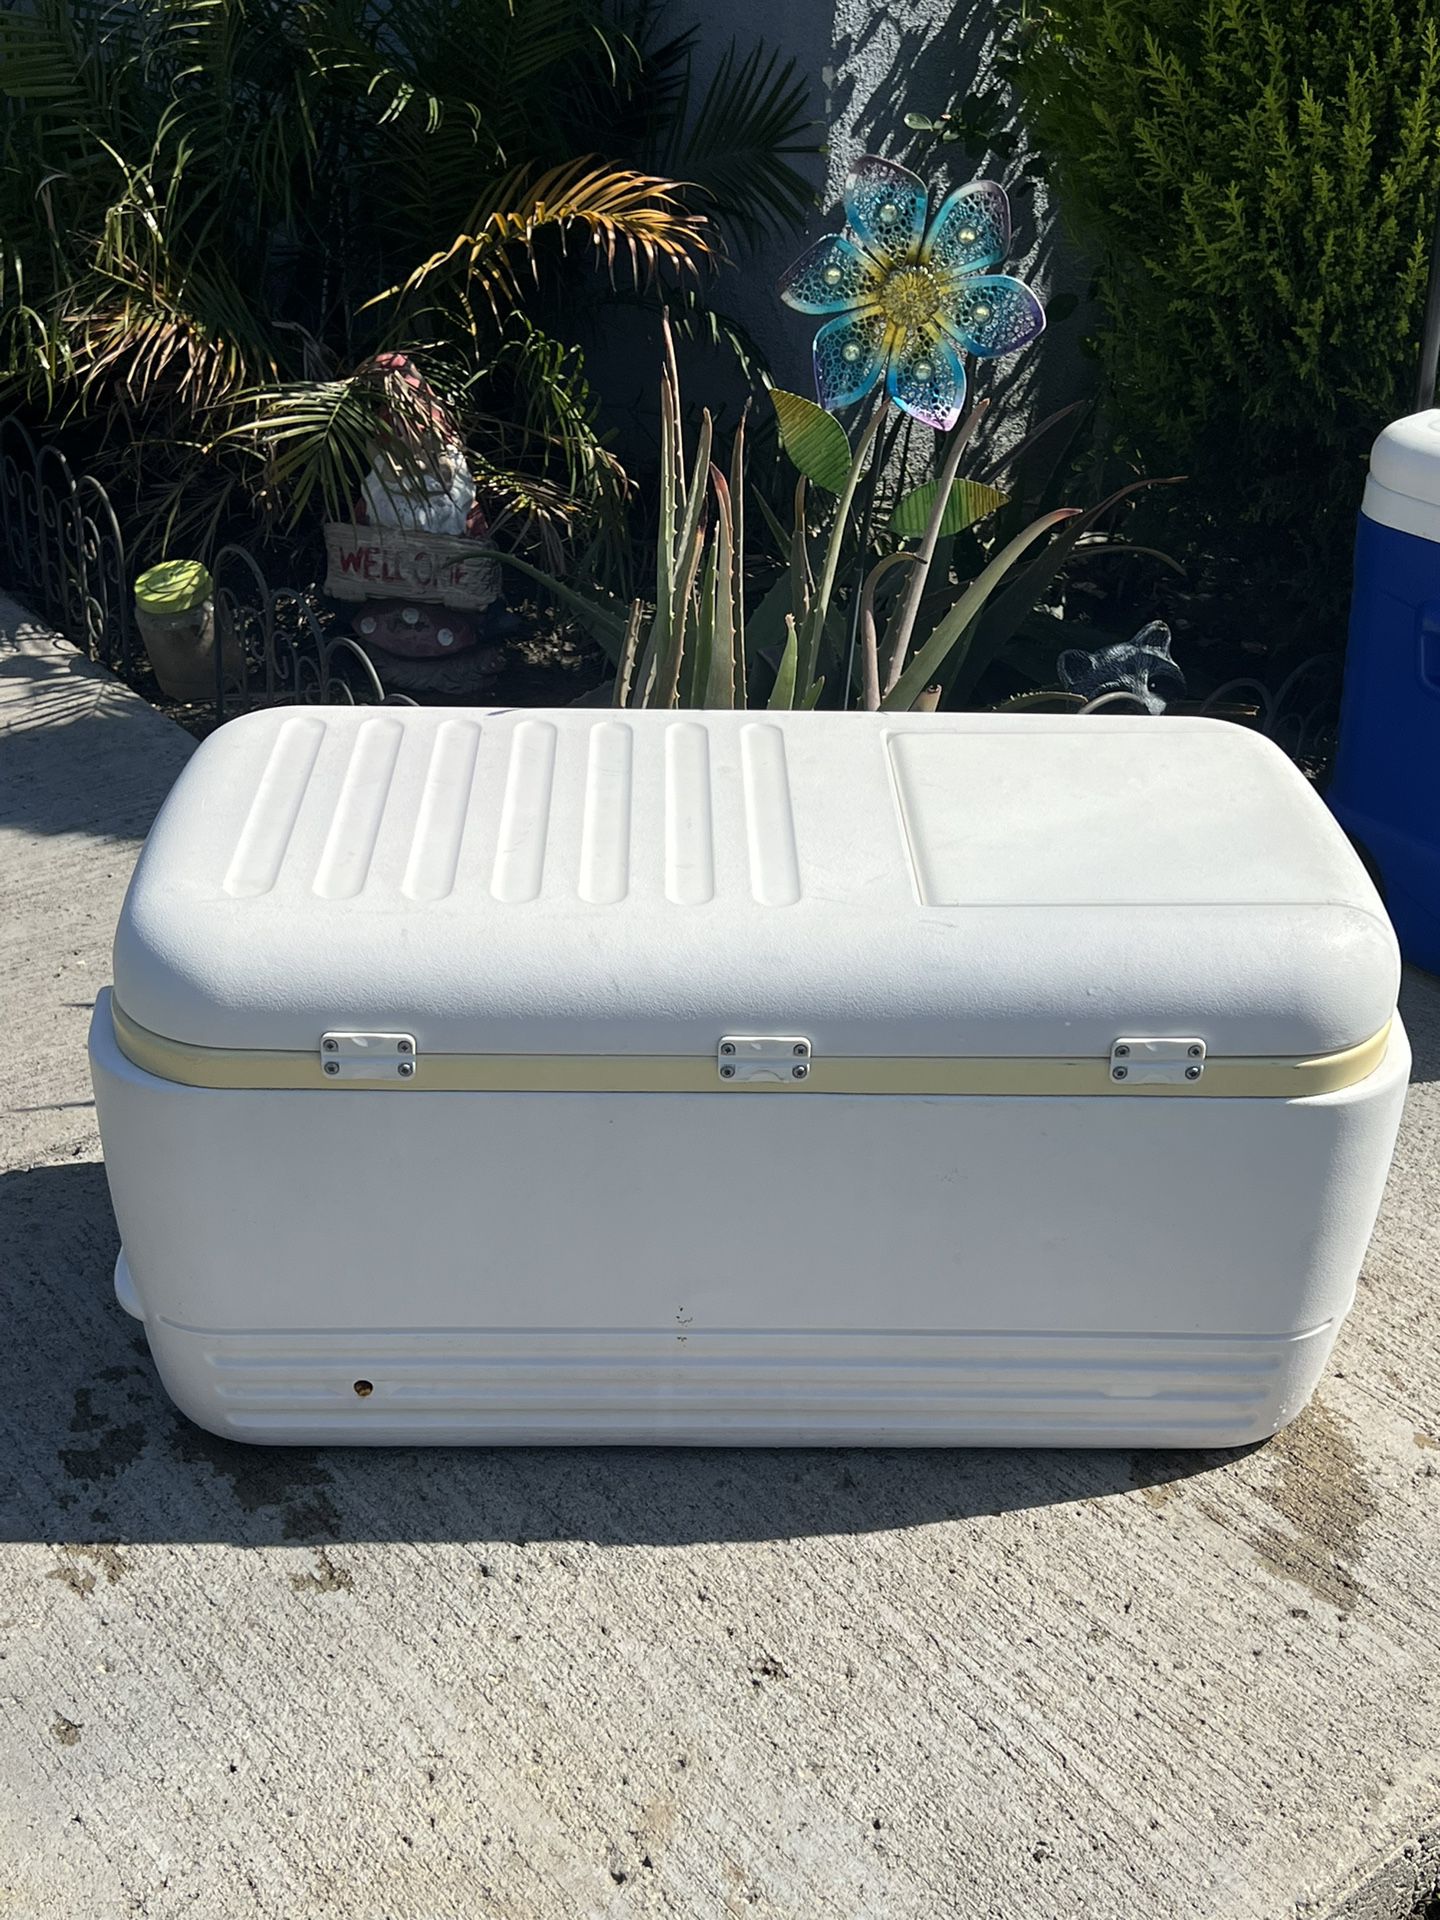 IGLOO ,ICE CHEST COOLER